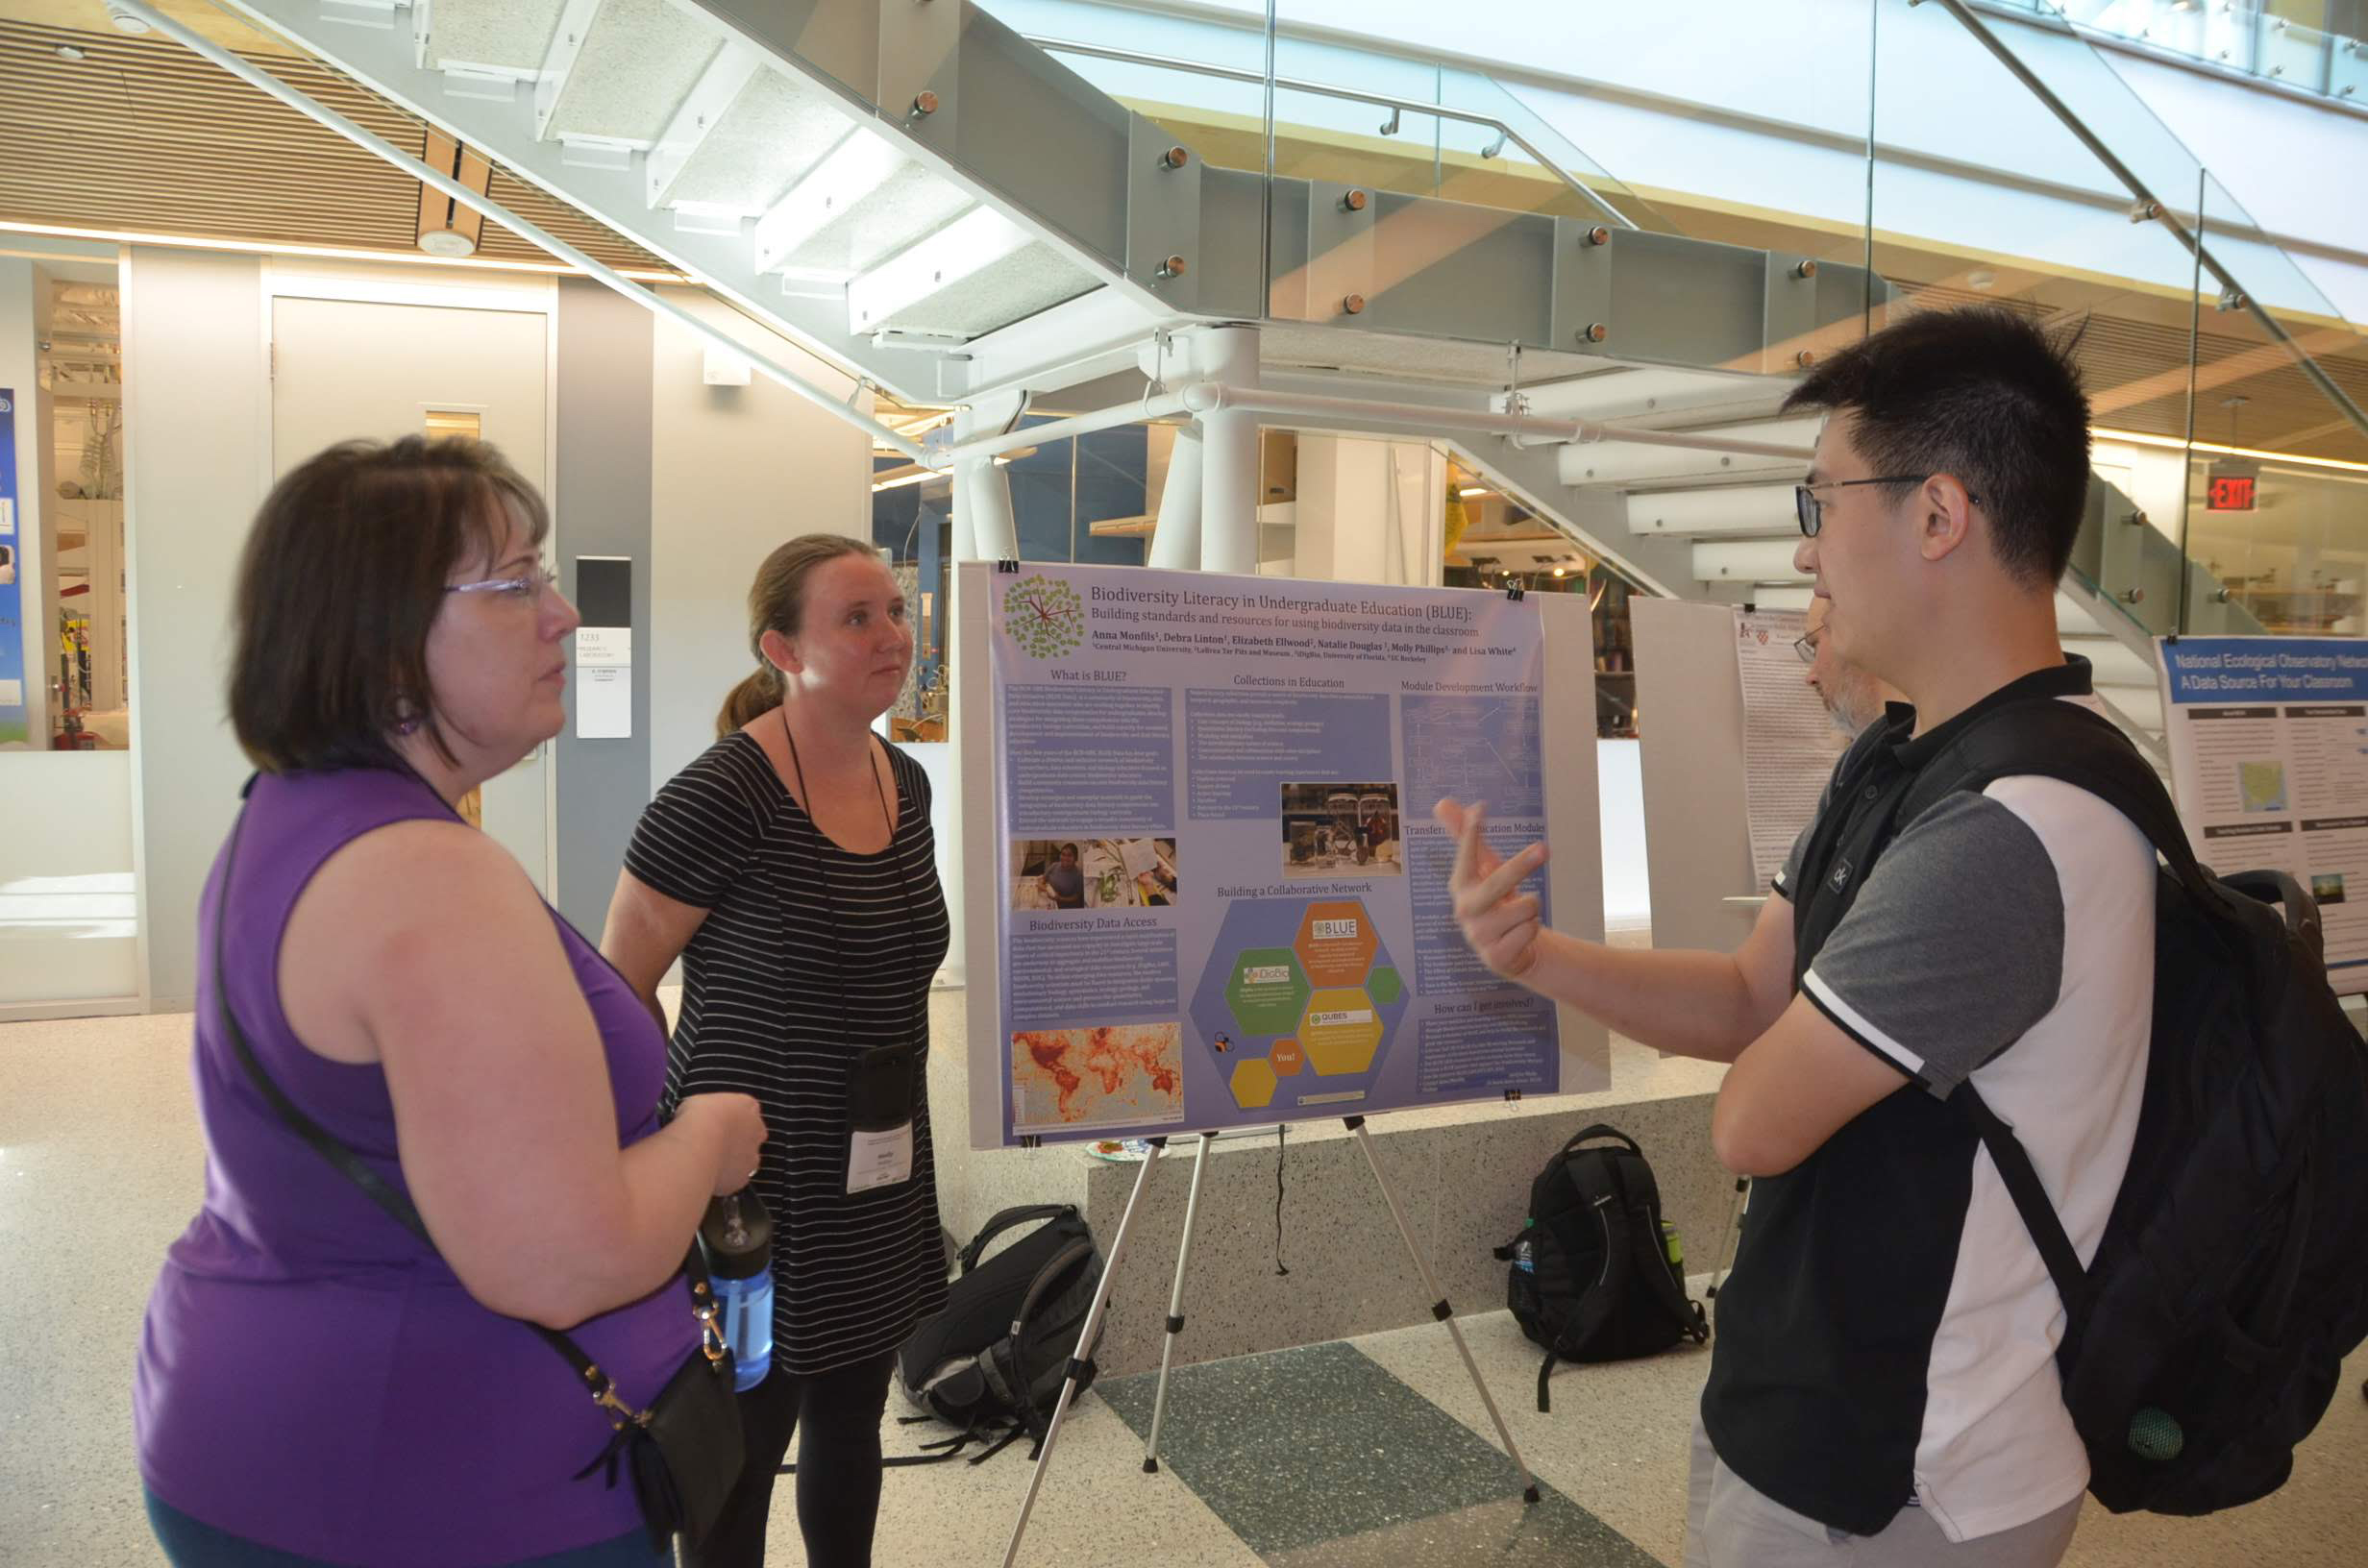 Debra Linton and Molly Phillips speaking with a student at the poster session